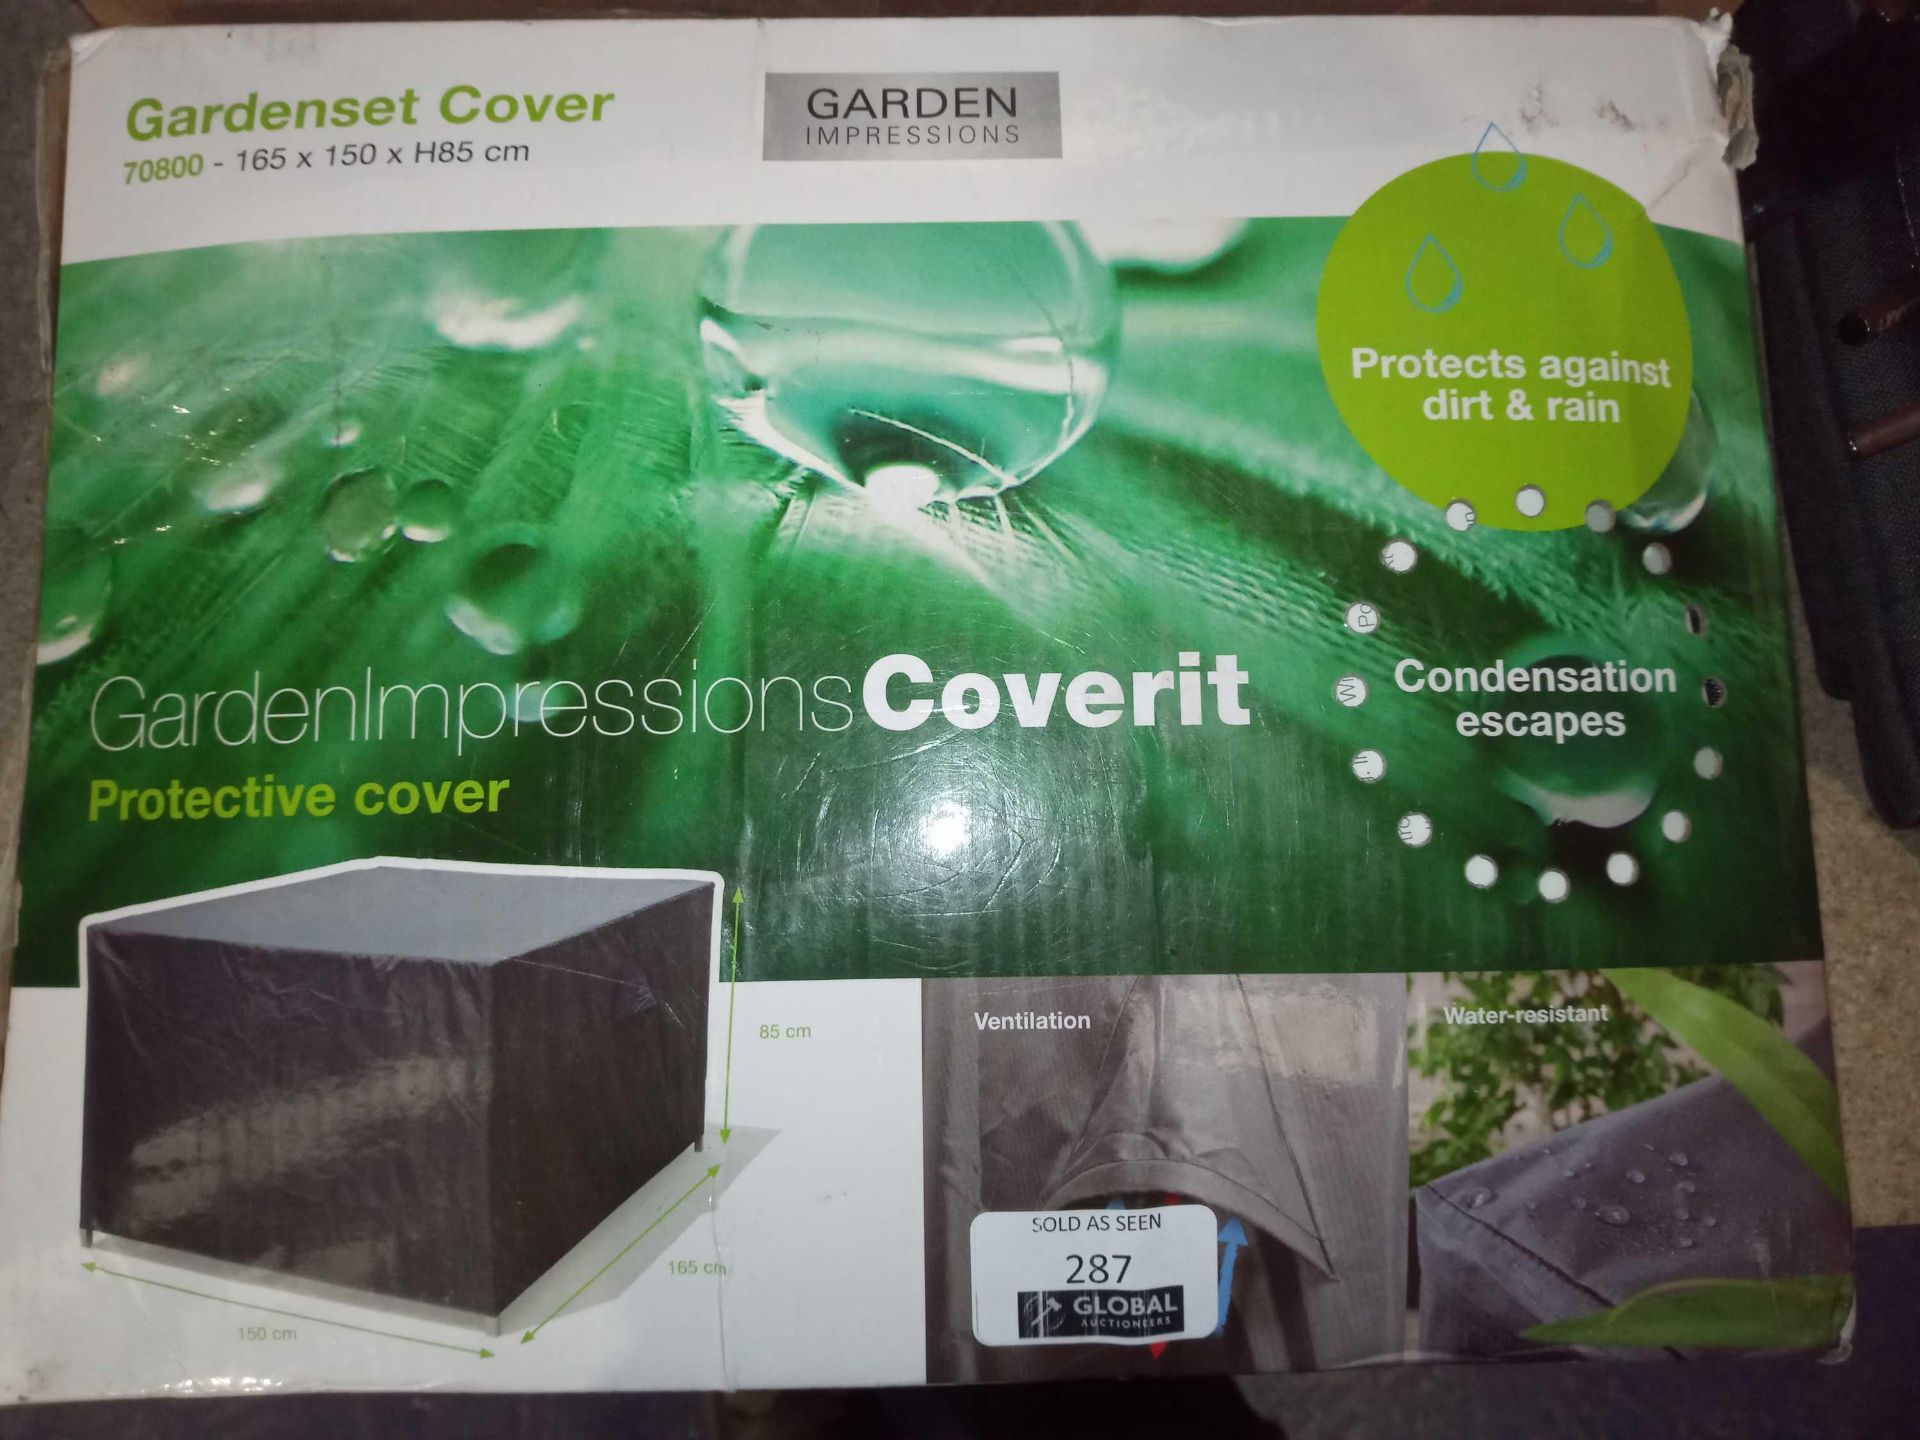 Boxed gardenset cover protective cover